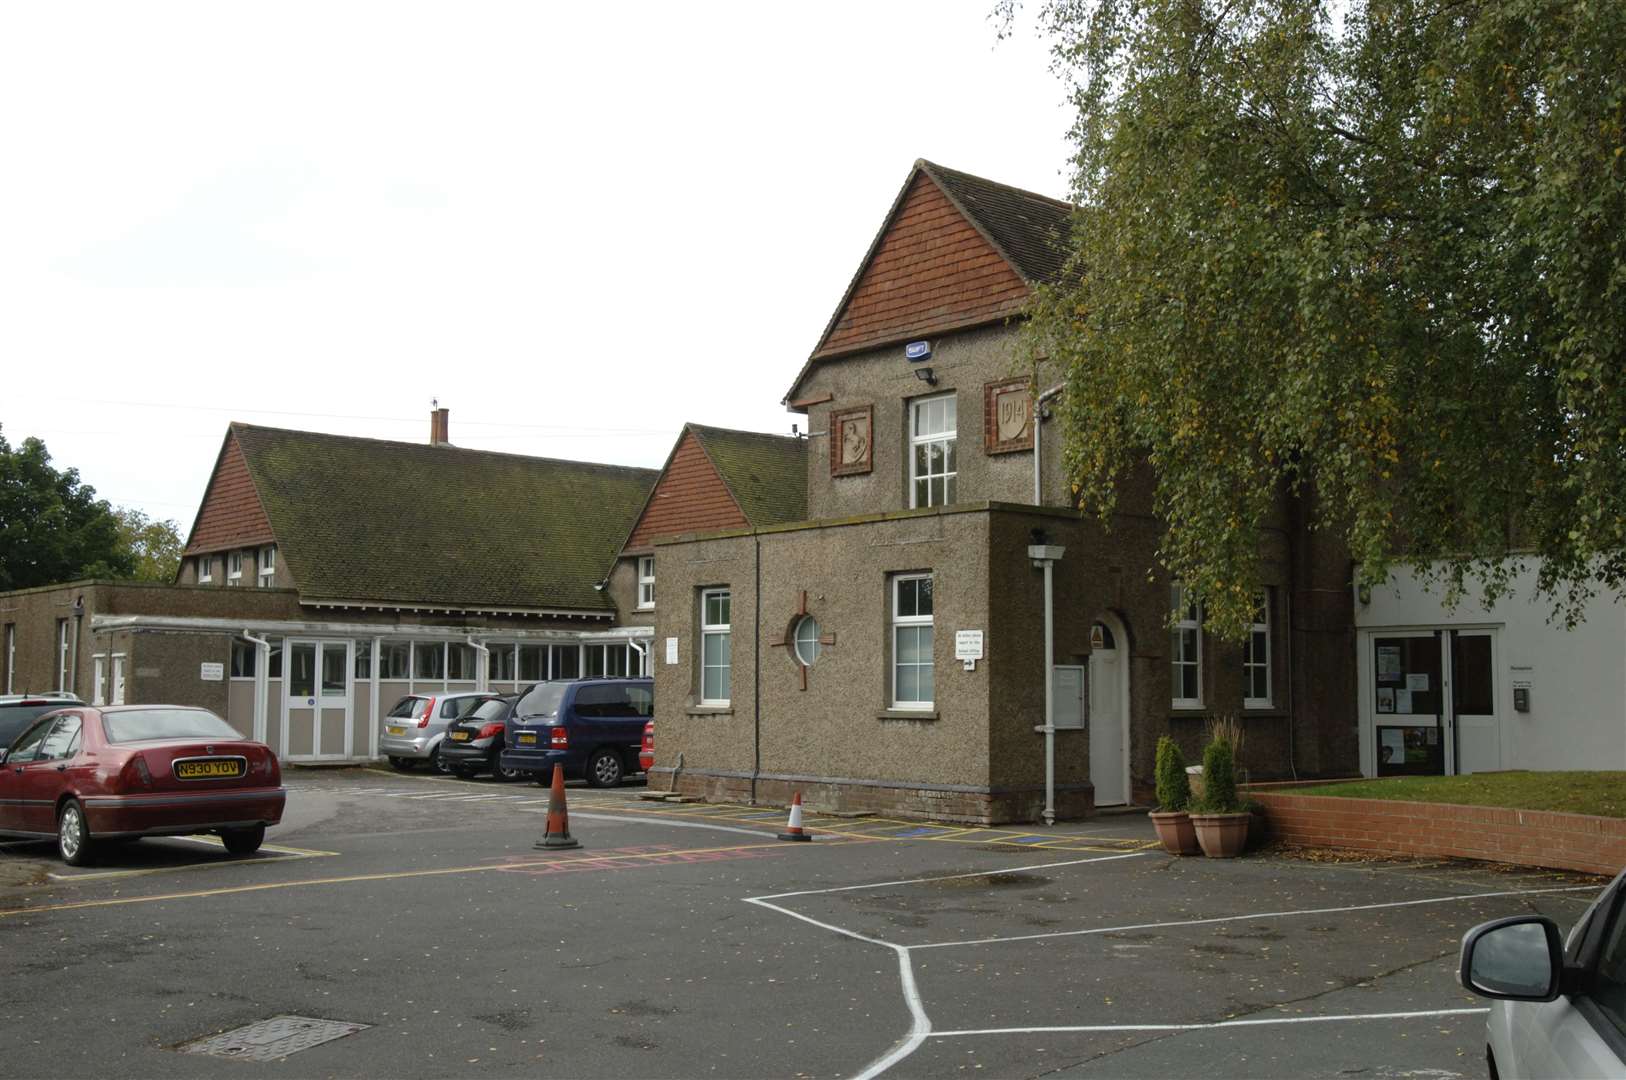 Although modernised, Sutton Valence Primary School is still based on the 1914 building that the boys knew